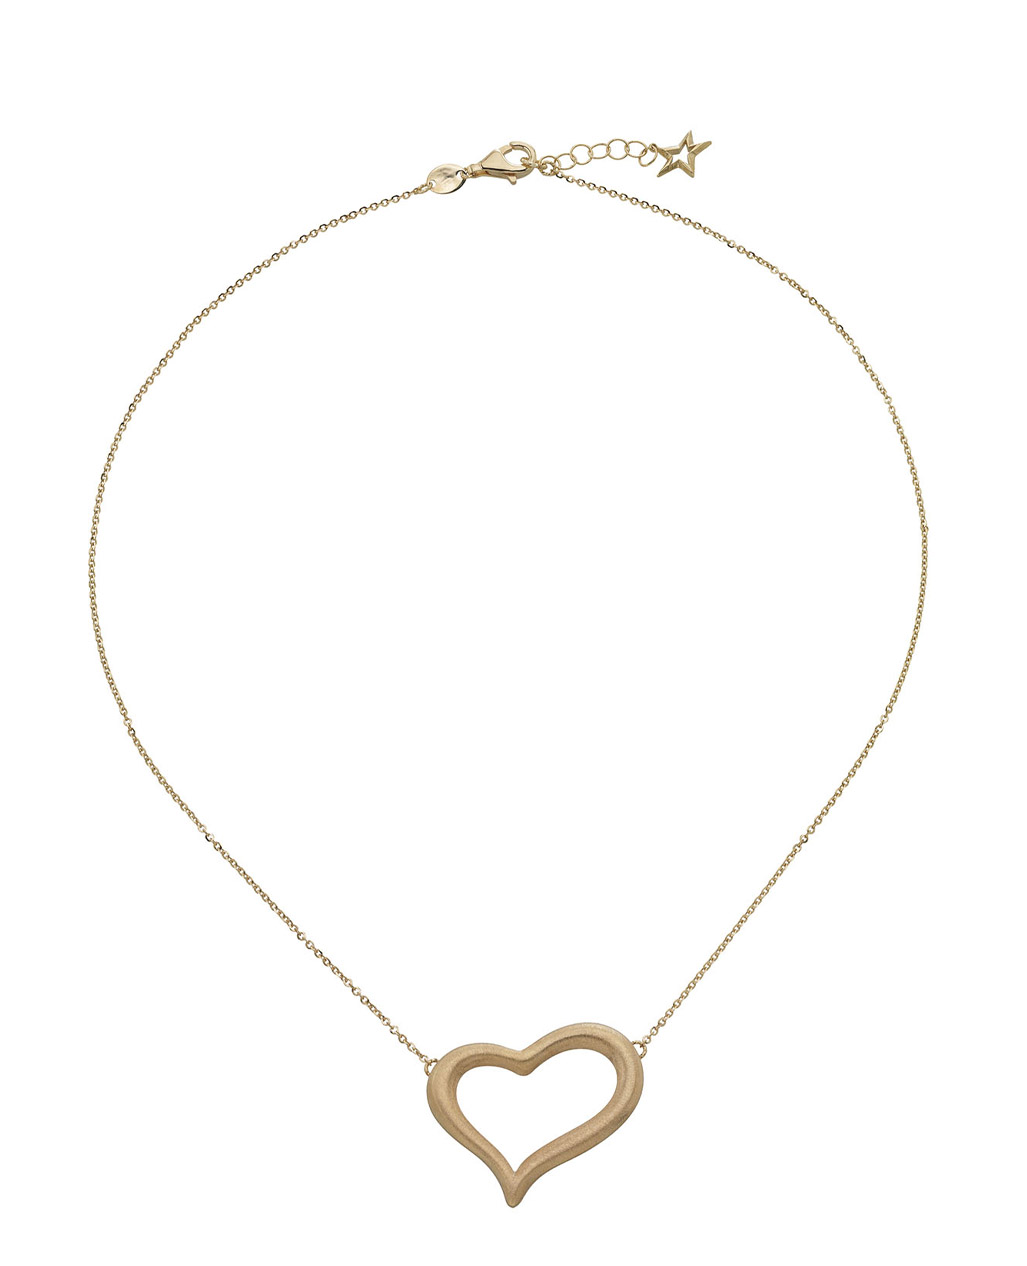 Mizar Heart Shaped Necklace 18kt Gold Made In Italy